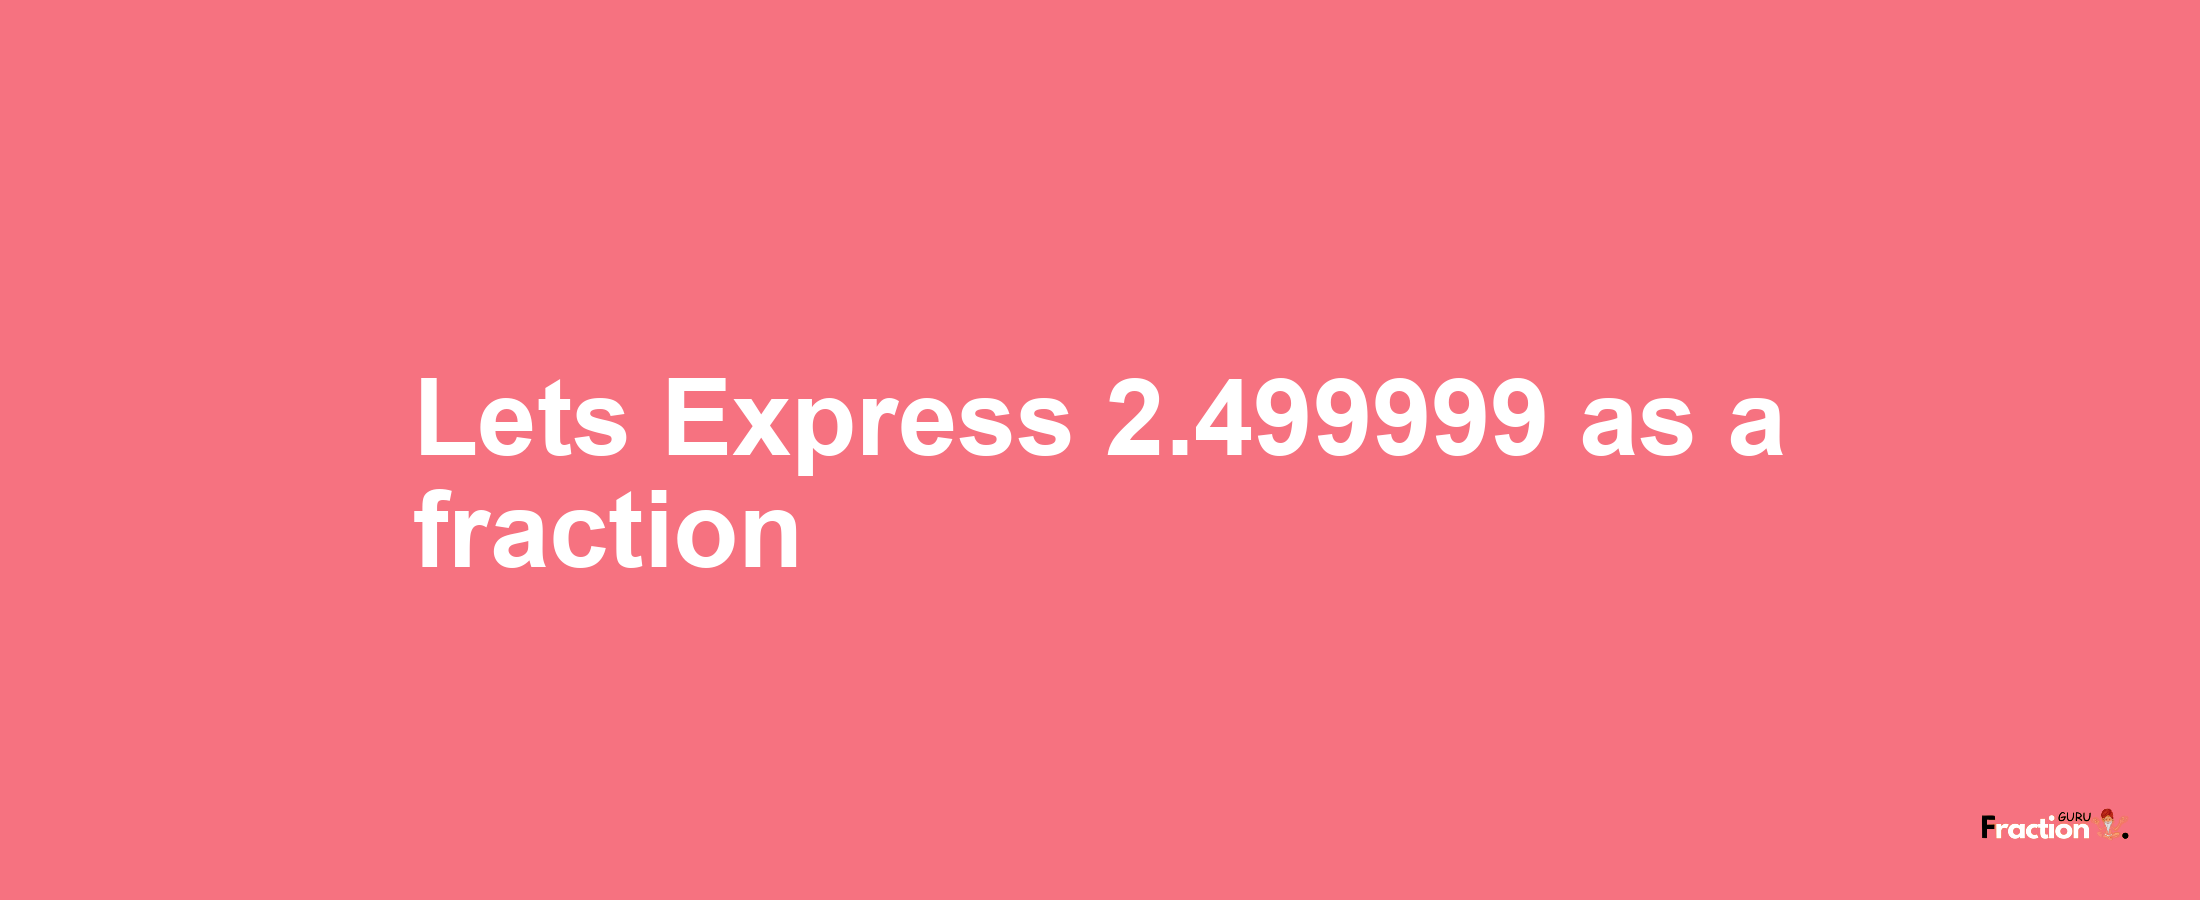 Lets Express 2.499999 as afraction